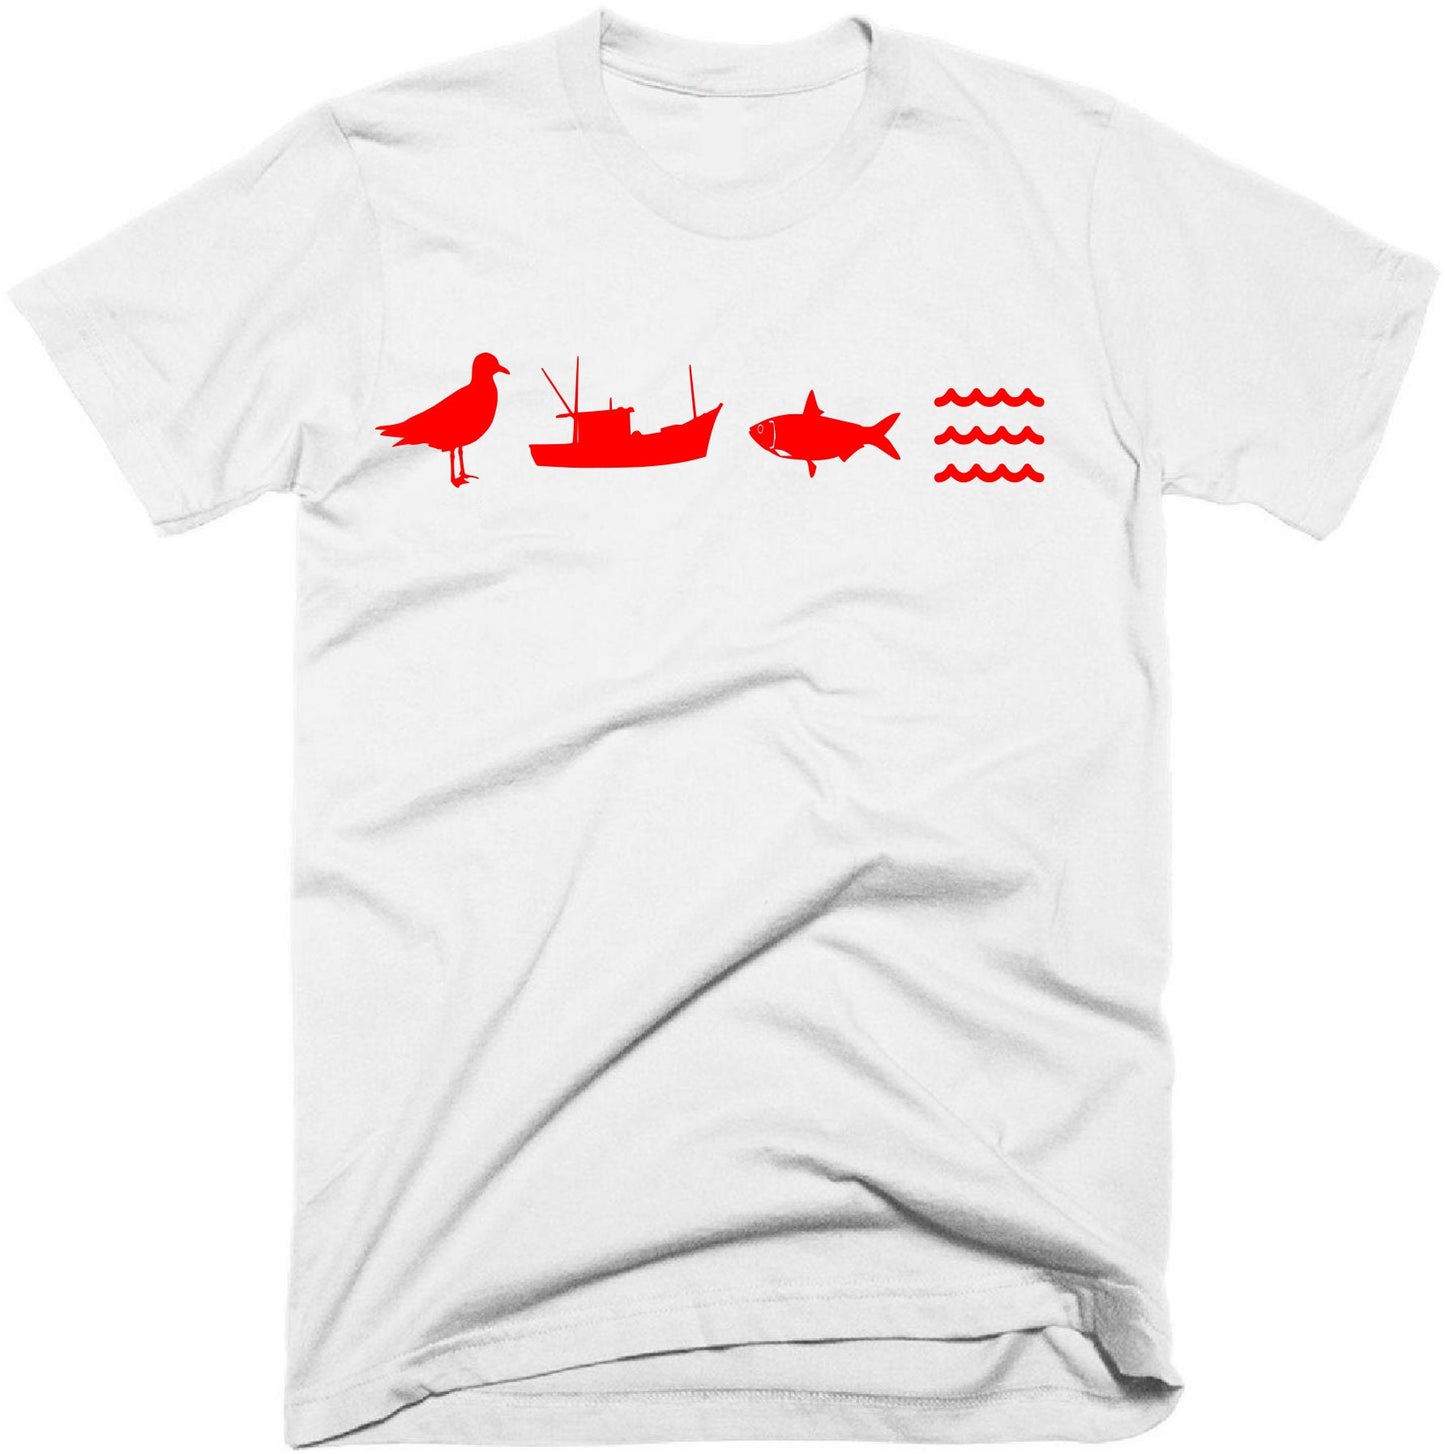 Eric Cantona - When seagulls follow the trawler it is because they think sardines will be thrown into the sea t-shirt.